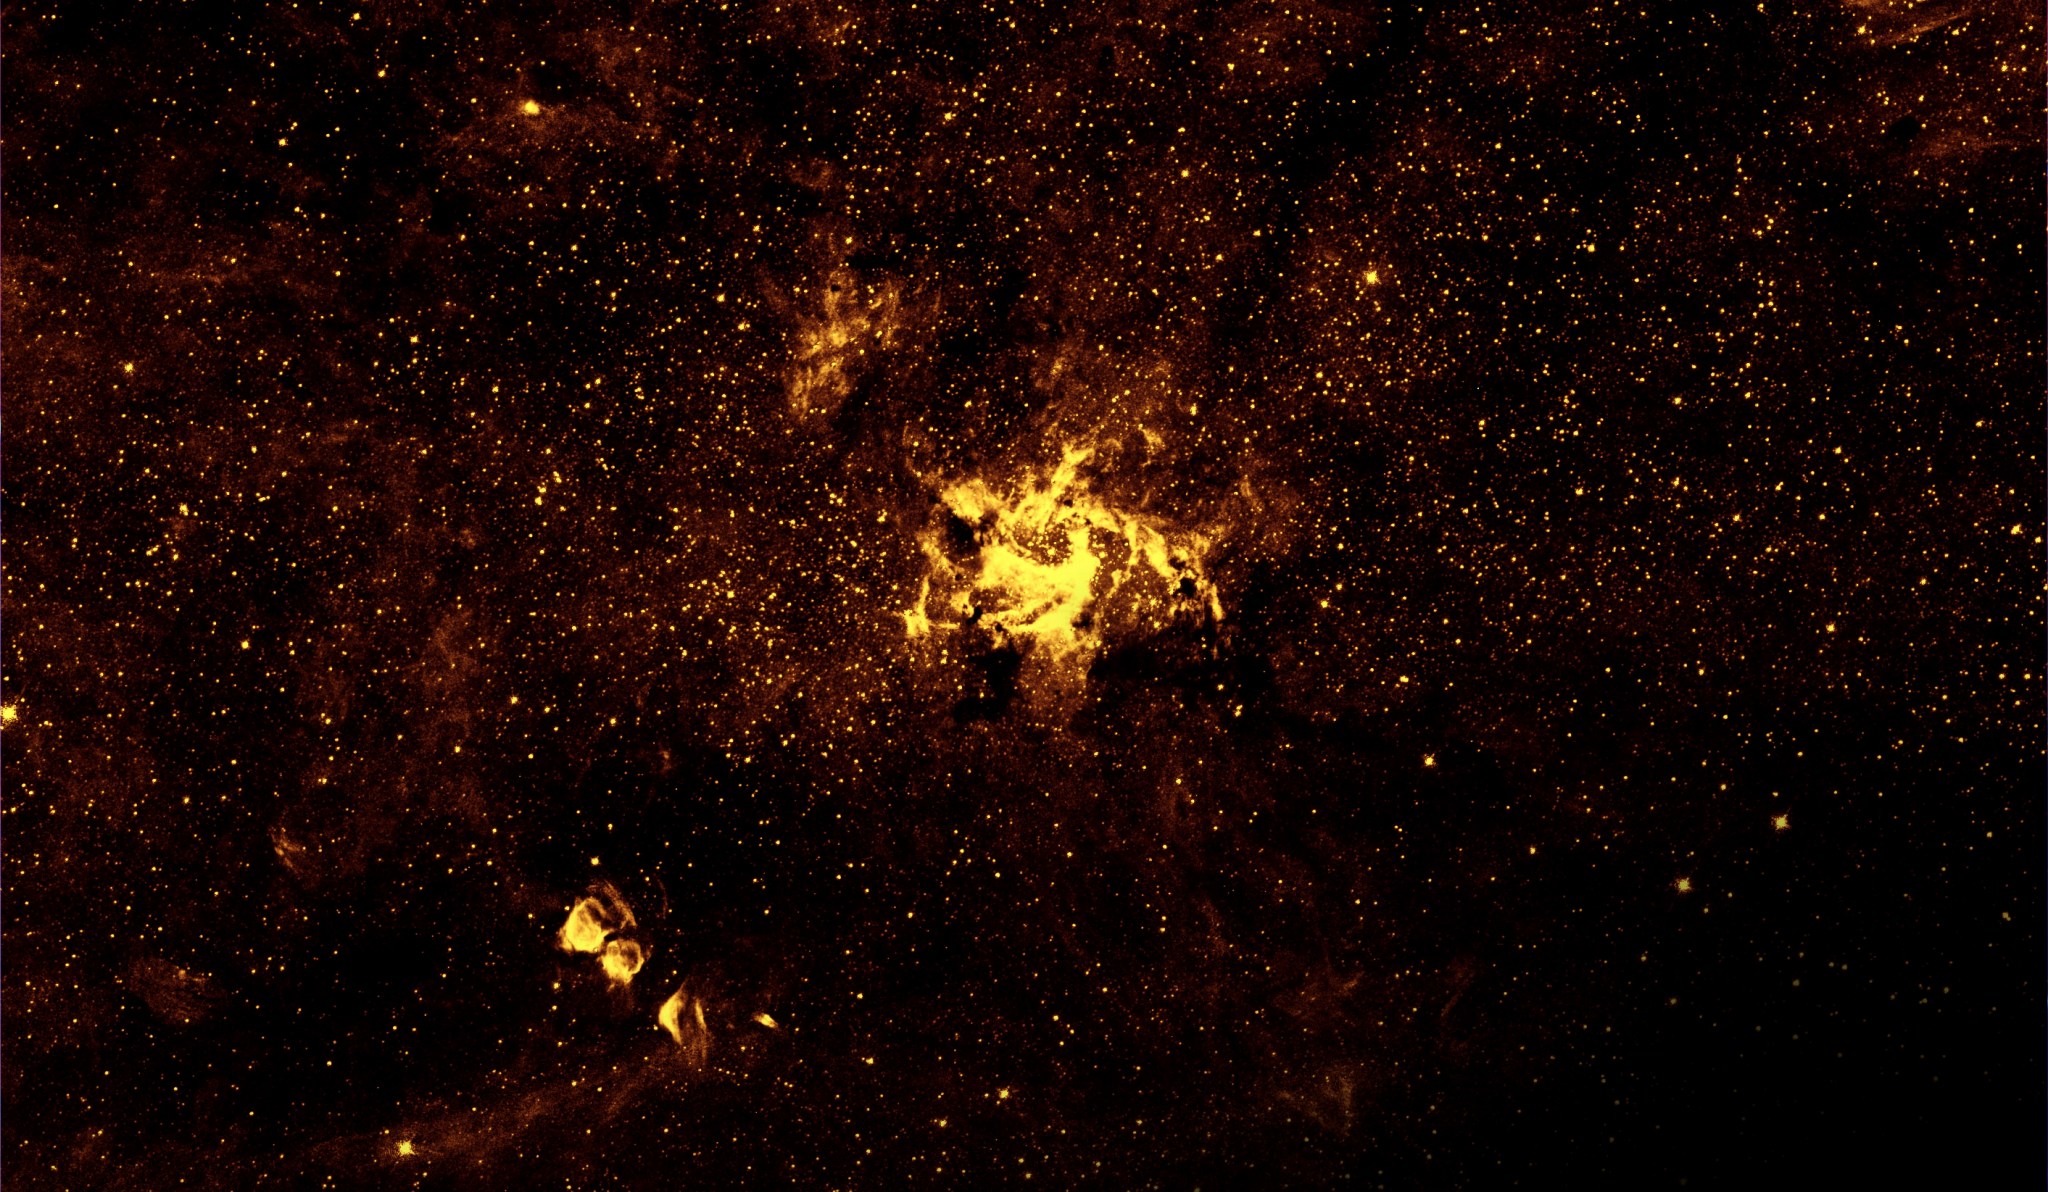 Heated gas swirls around the region of the Milky Way galaxy’s supermassive black hole, illuminated in near-infrared light captured by NASA’s Hubble Space Telescope.